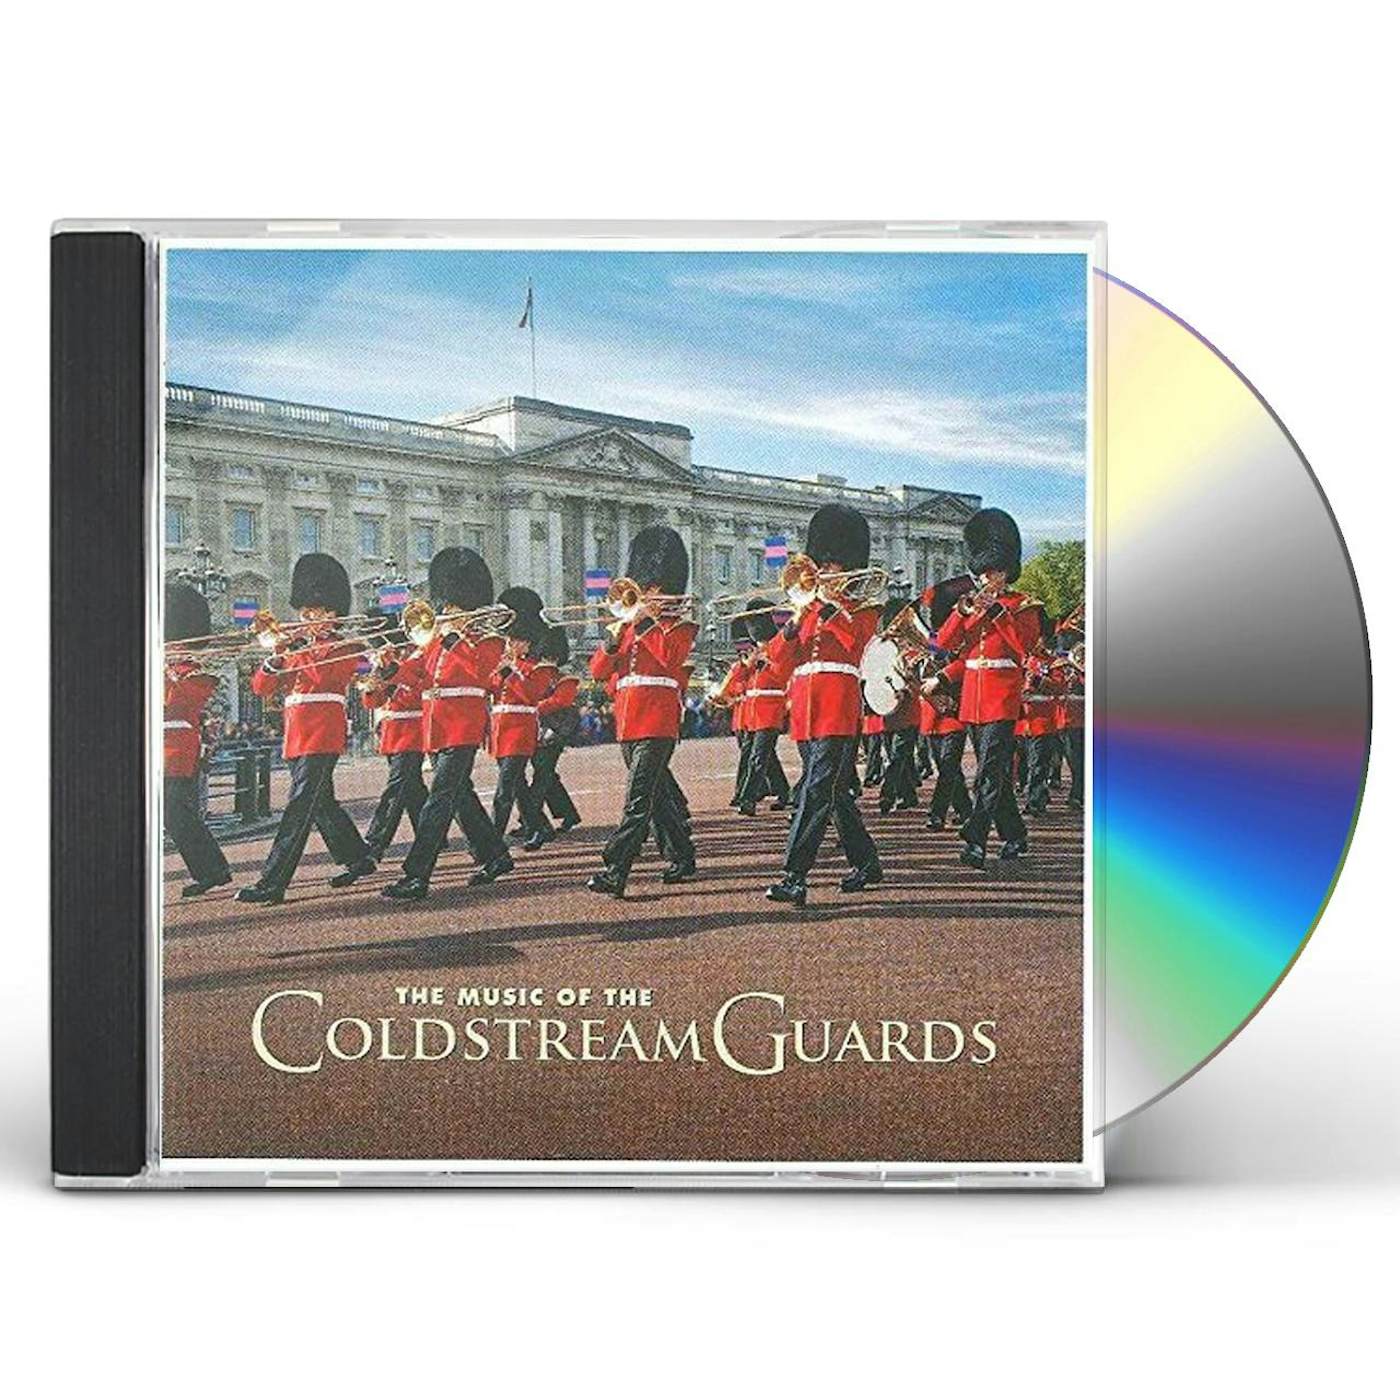 MUSIC OF THE COLDSTREAM GUARDS CD